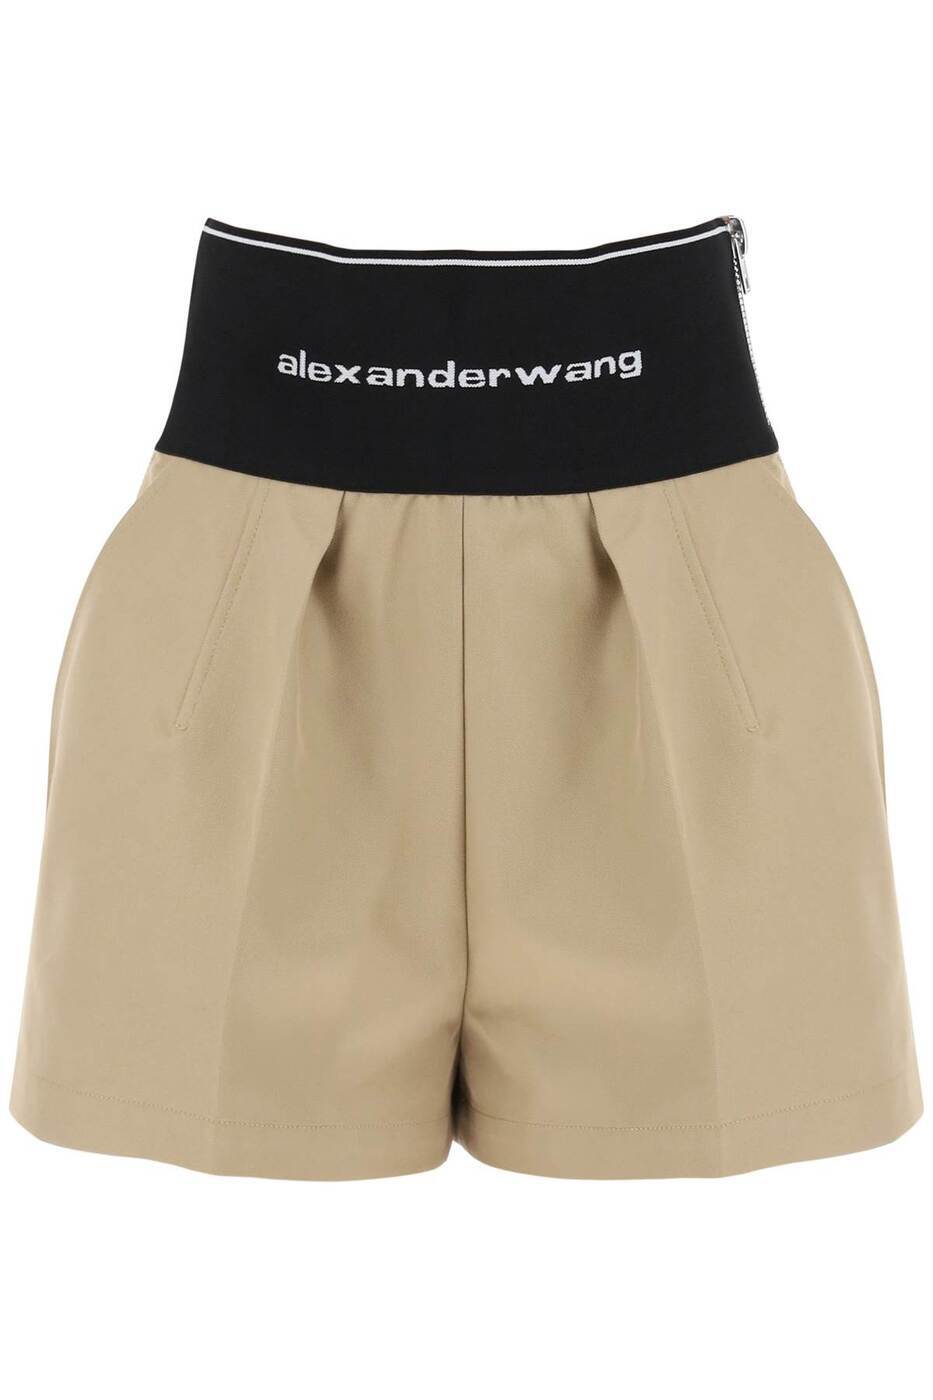 ALEXANDER WANG 쥭 ١ Beige Alexander wang cotton and nylon shorts with branded waistband 硼 ǥ ղ2024 1WC1224450 ڴǡ̵ۡڥåԥ̵ ik